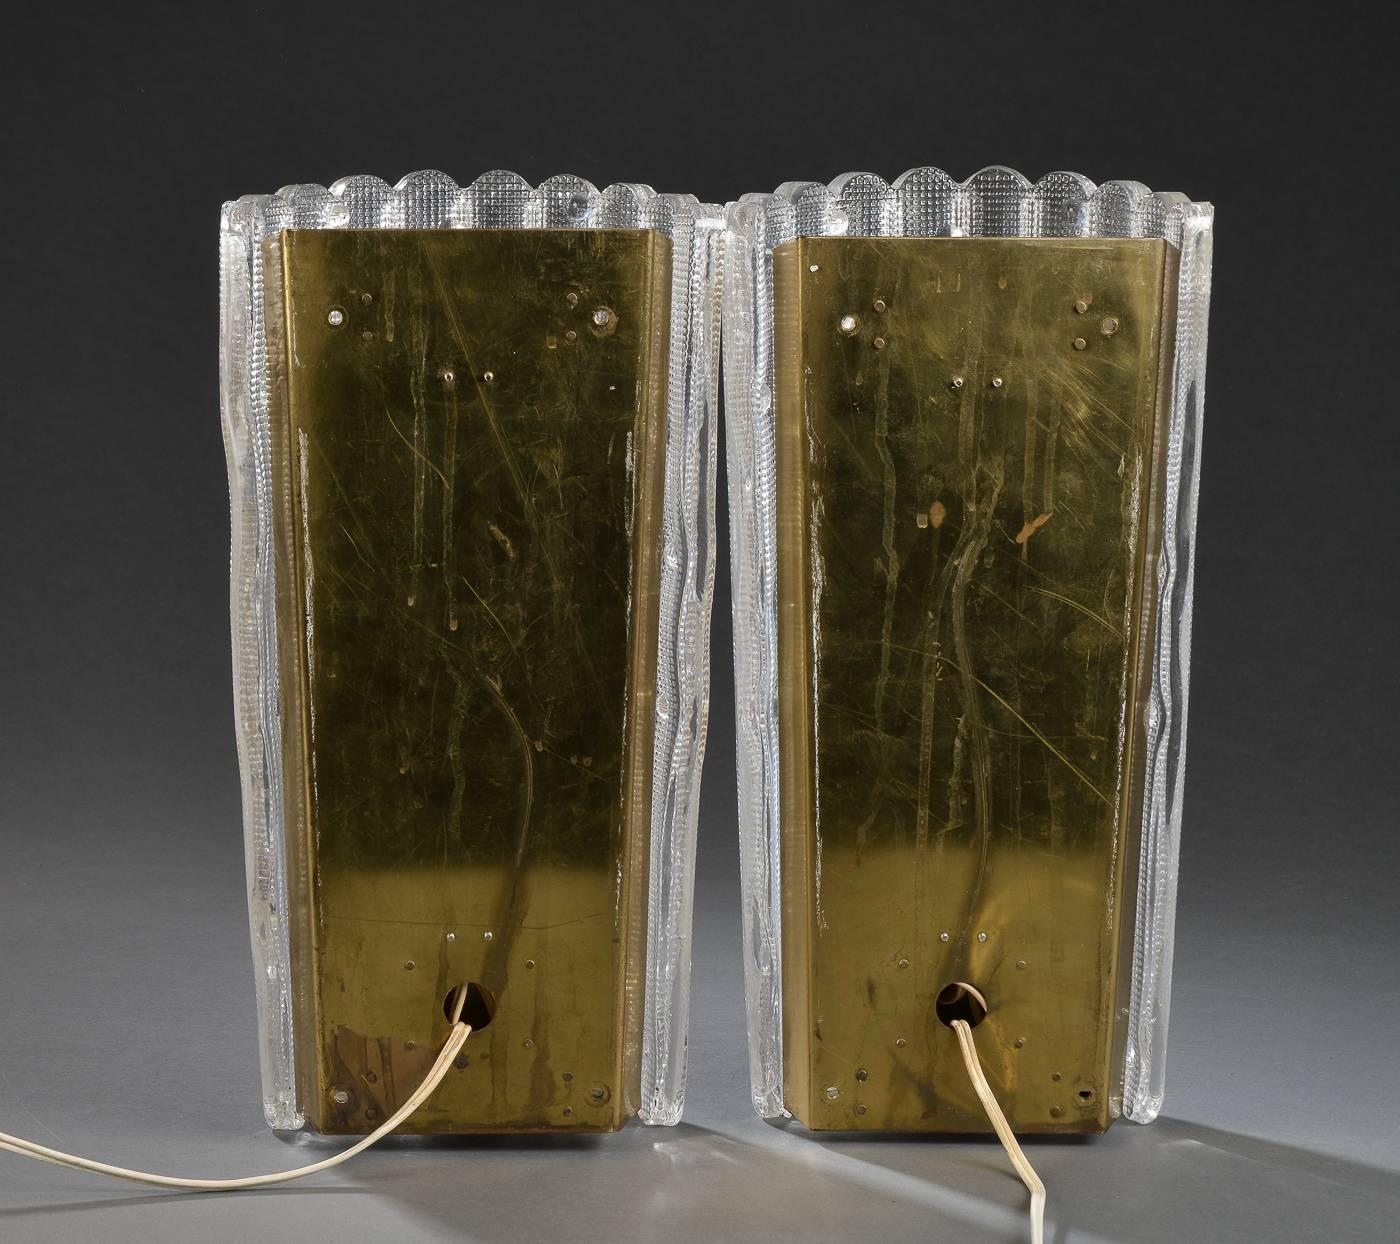 Swedish Pair of Large-Scale Pressed Glass and Brass Wall Sconces by Orrefors of Sweden